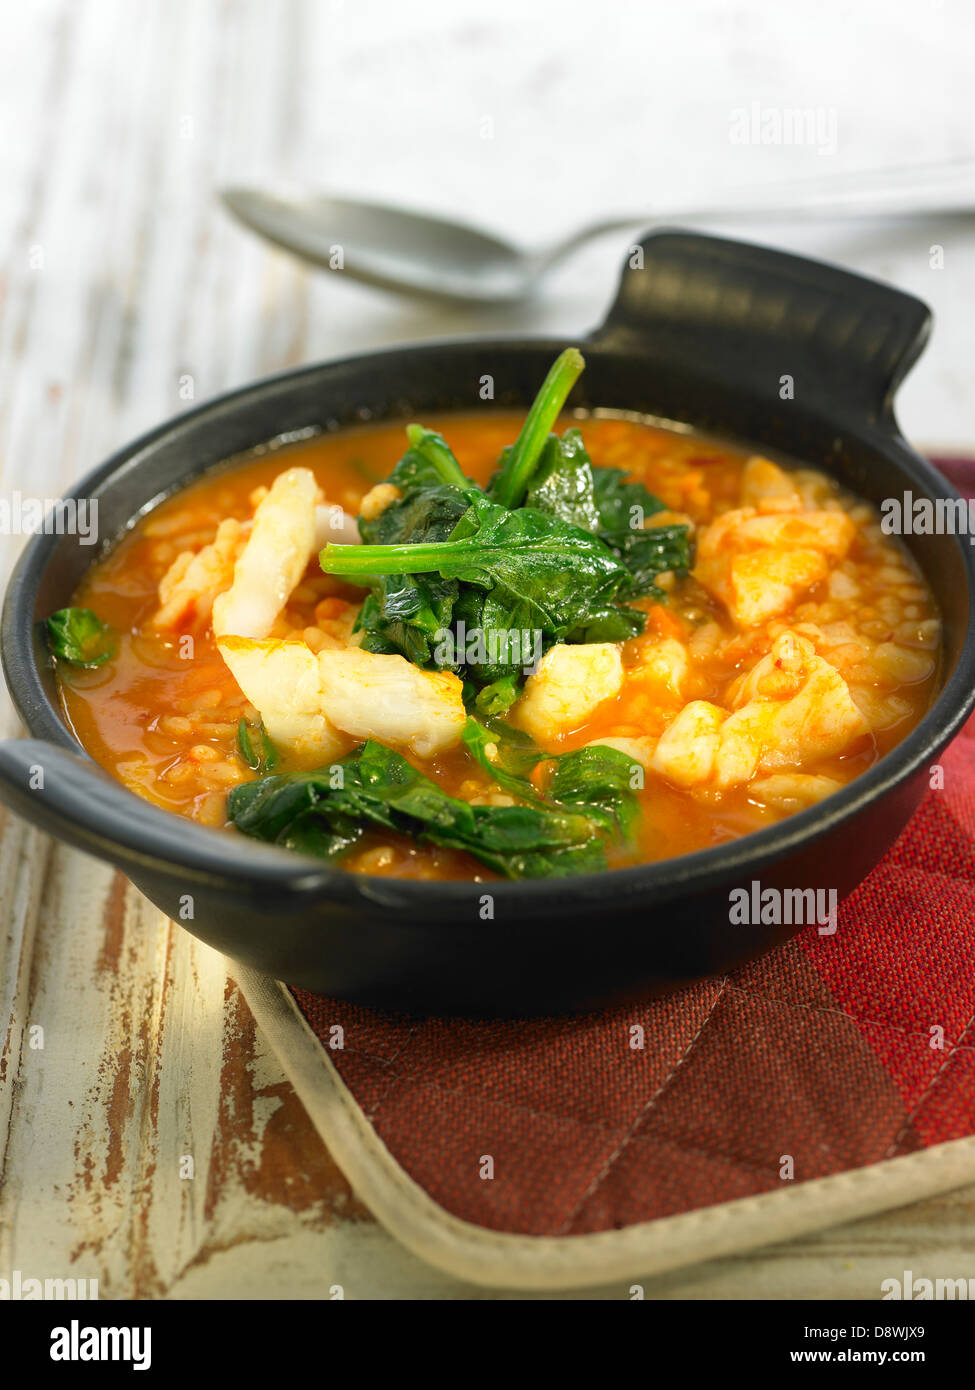 Rice,salt-cod and spinach in tomato sauce Stock Photo